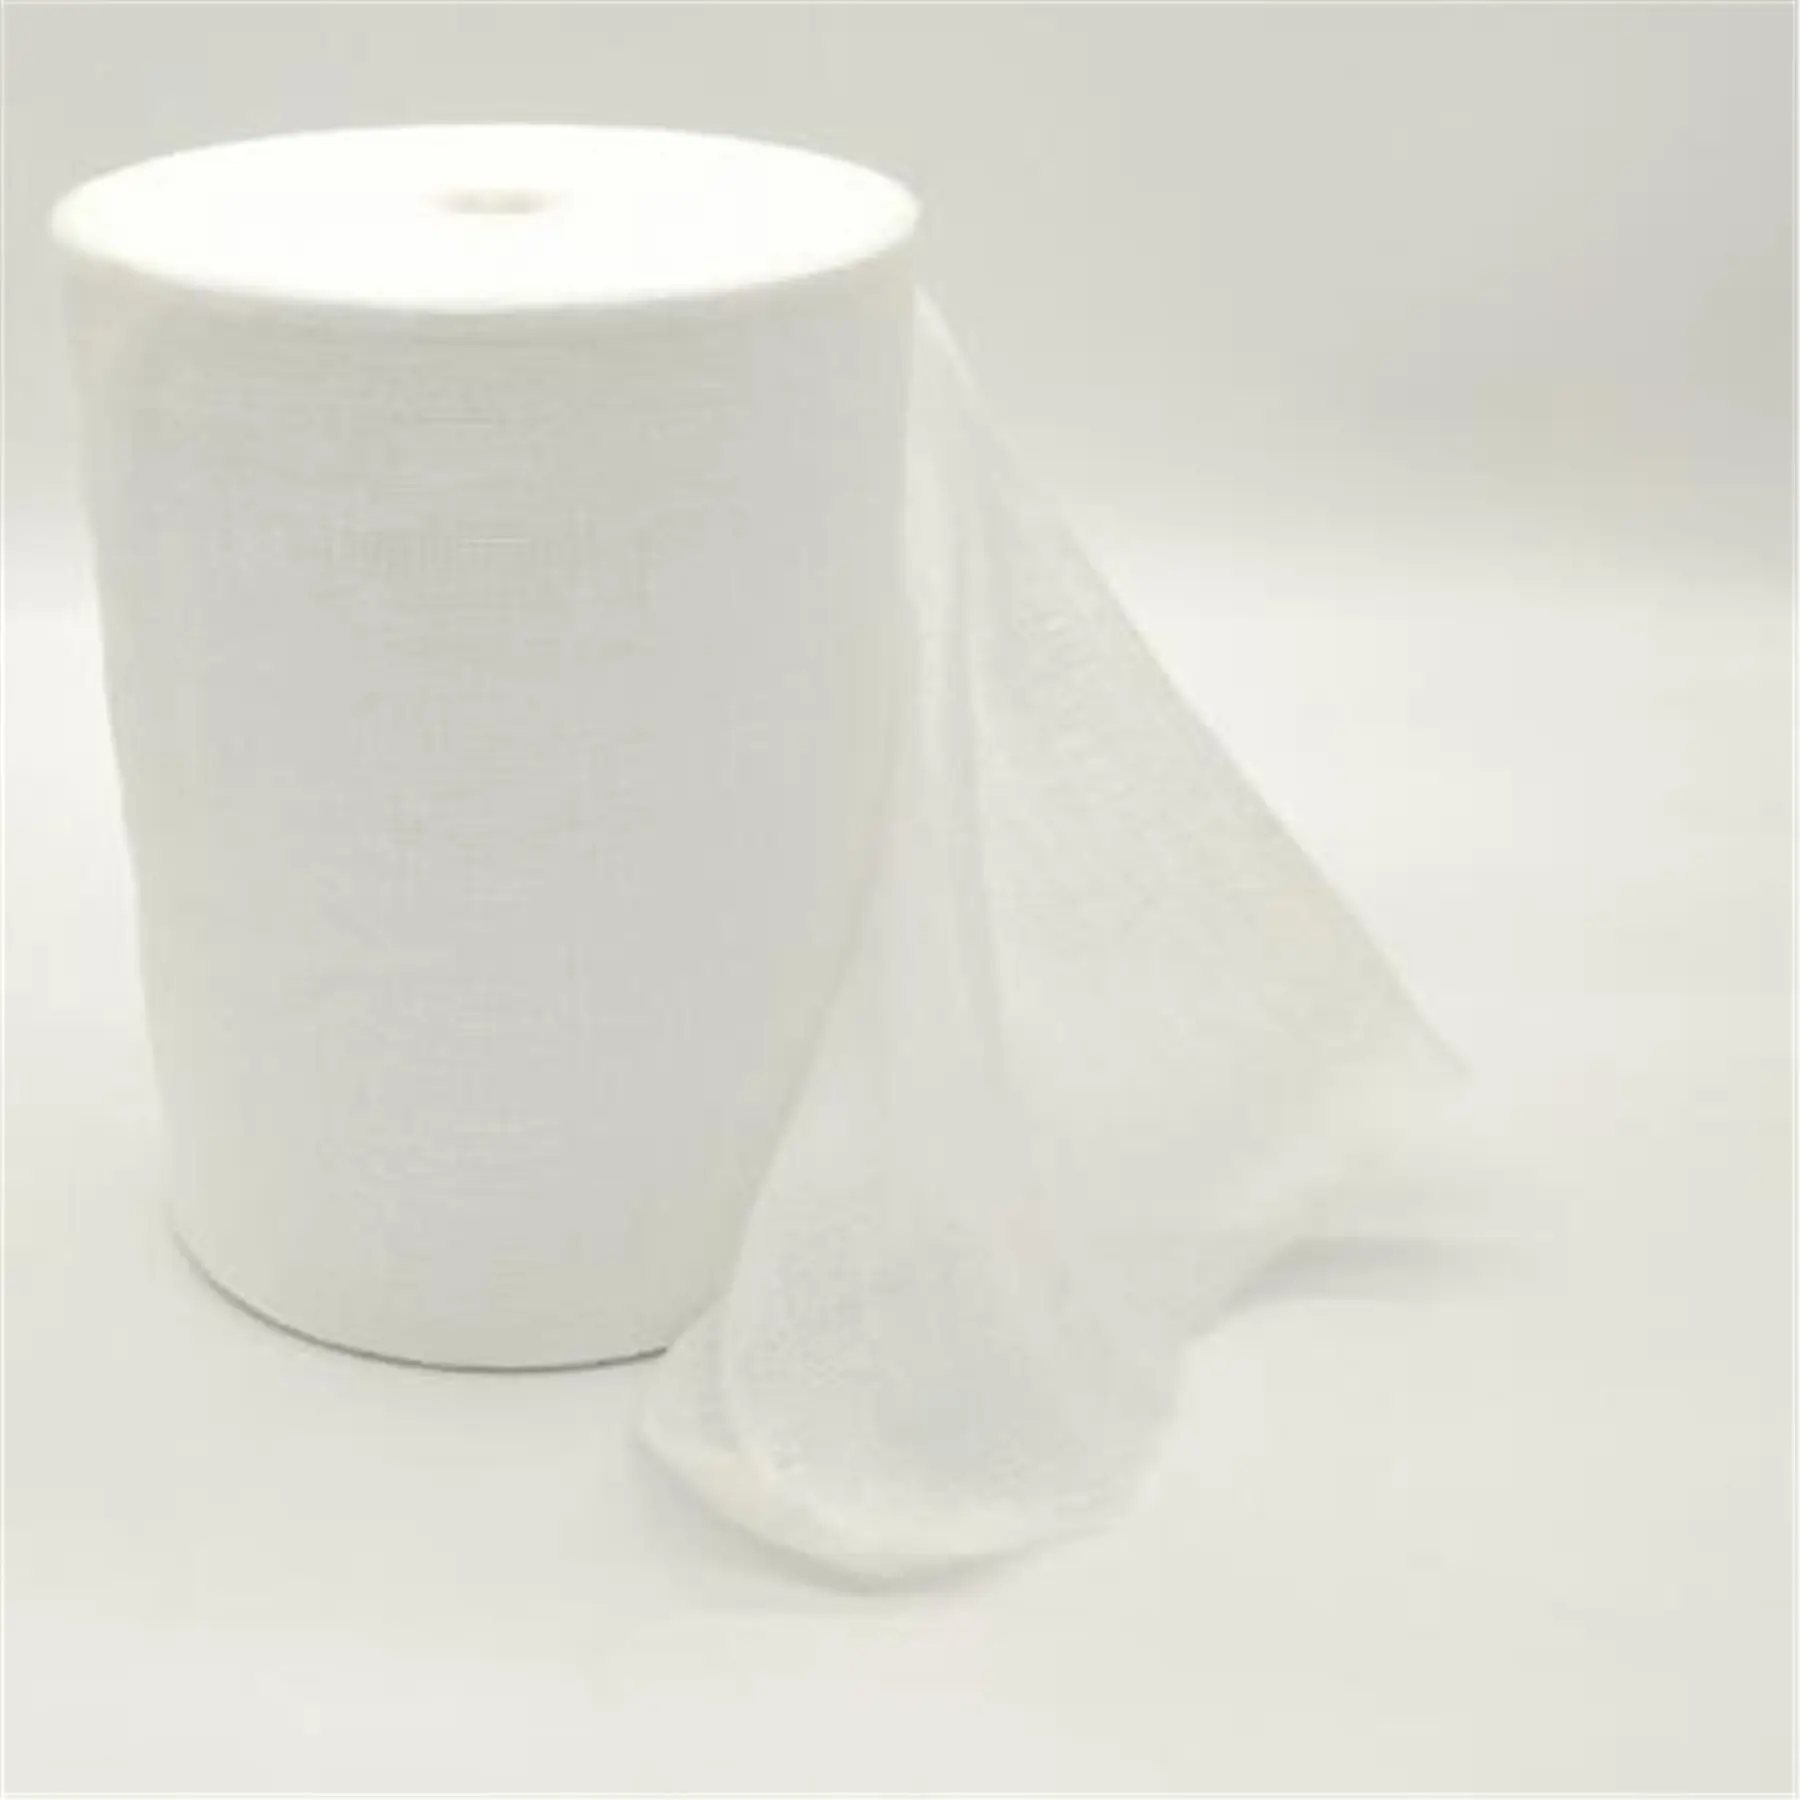 High quality hospital medical gauze roll sheet in 2 ply Medical gauze sheet without development